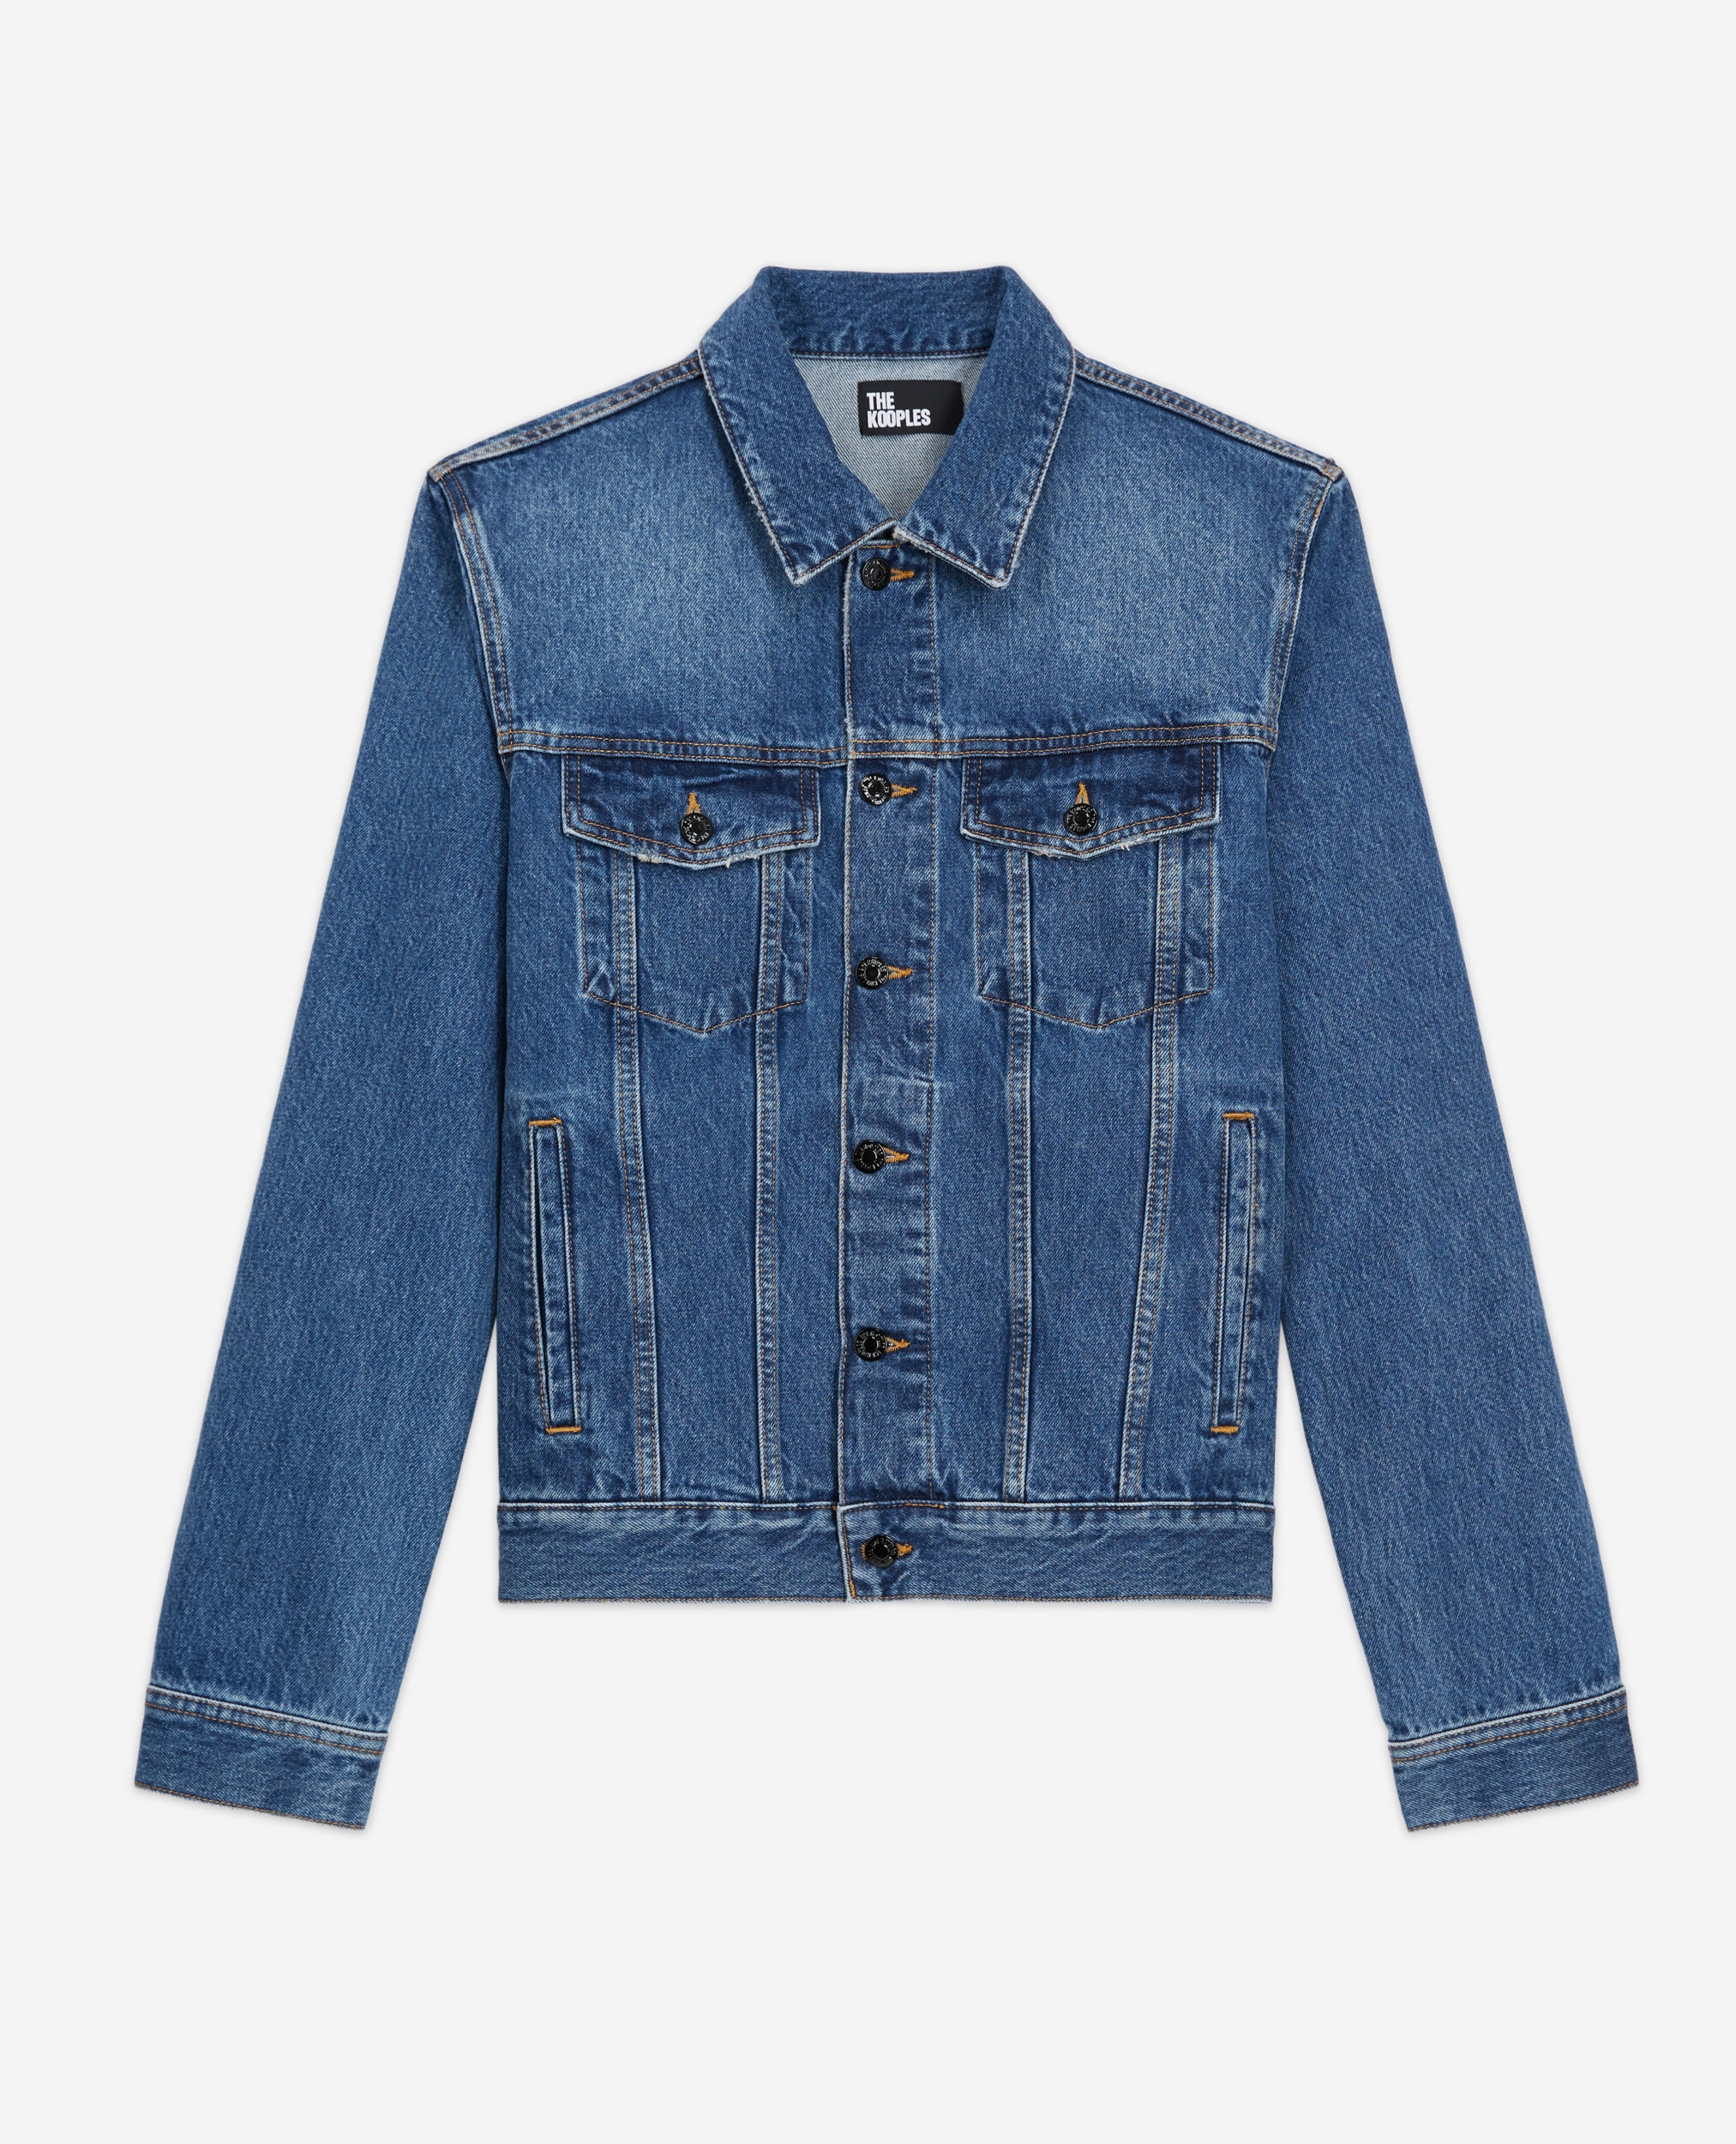 Denim Jackets - Upto 50% to 80% OFF on Jean Jackets for Women